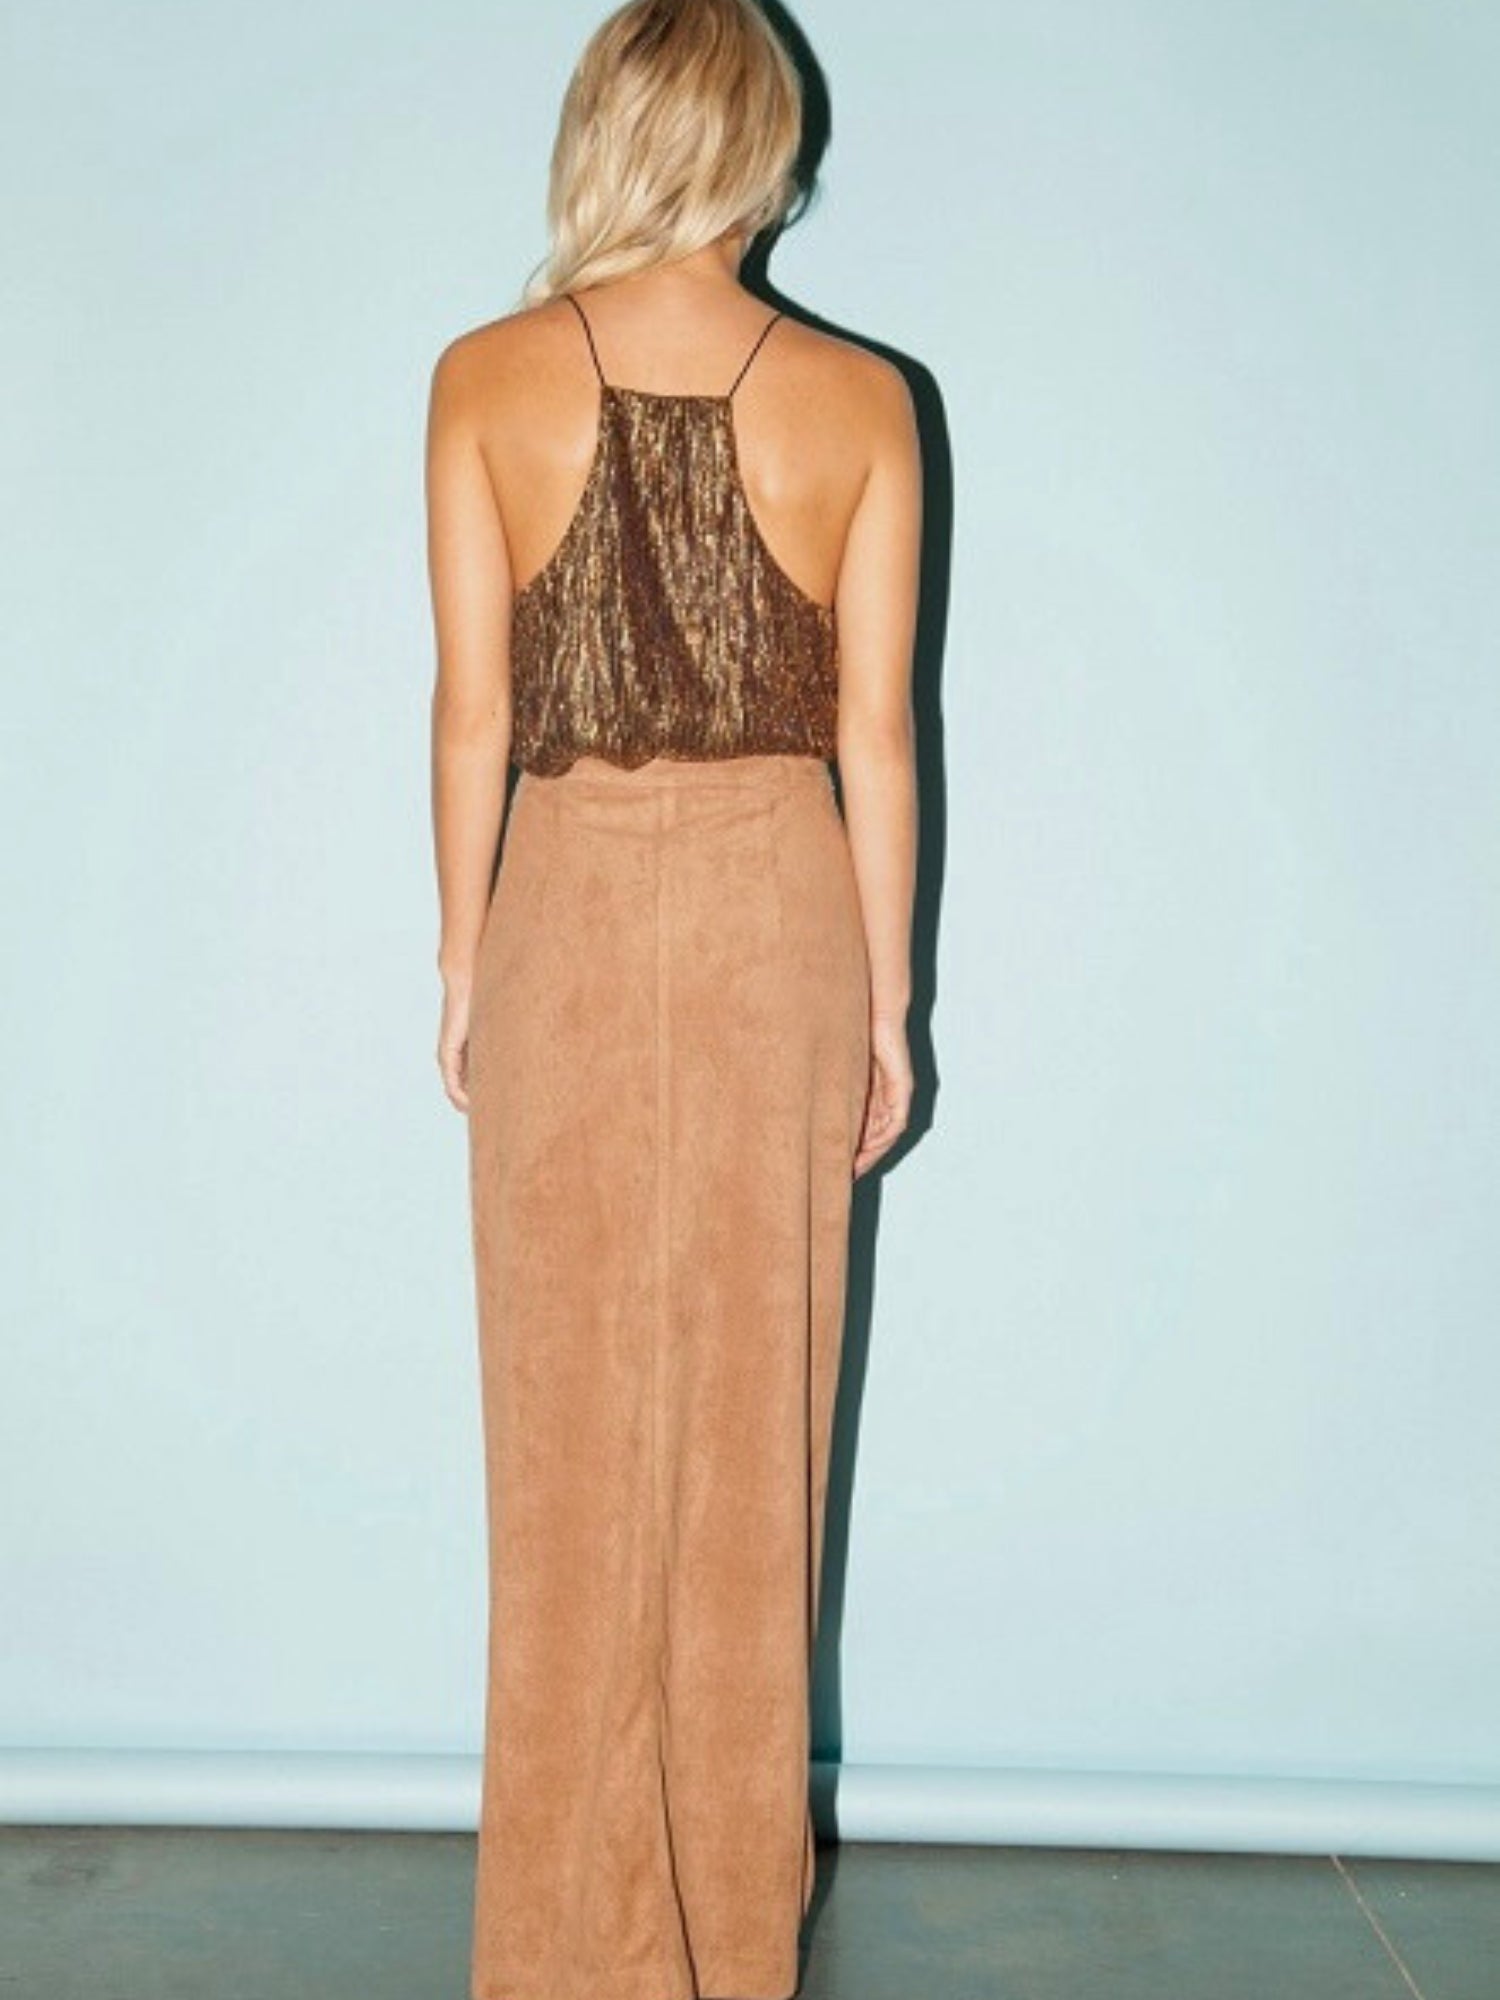 The Backstage Corduroy Maxi Skirt, Bottoms, ISC - Ivory Sheep Collection Limited